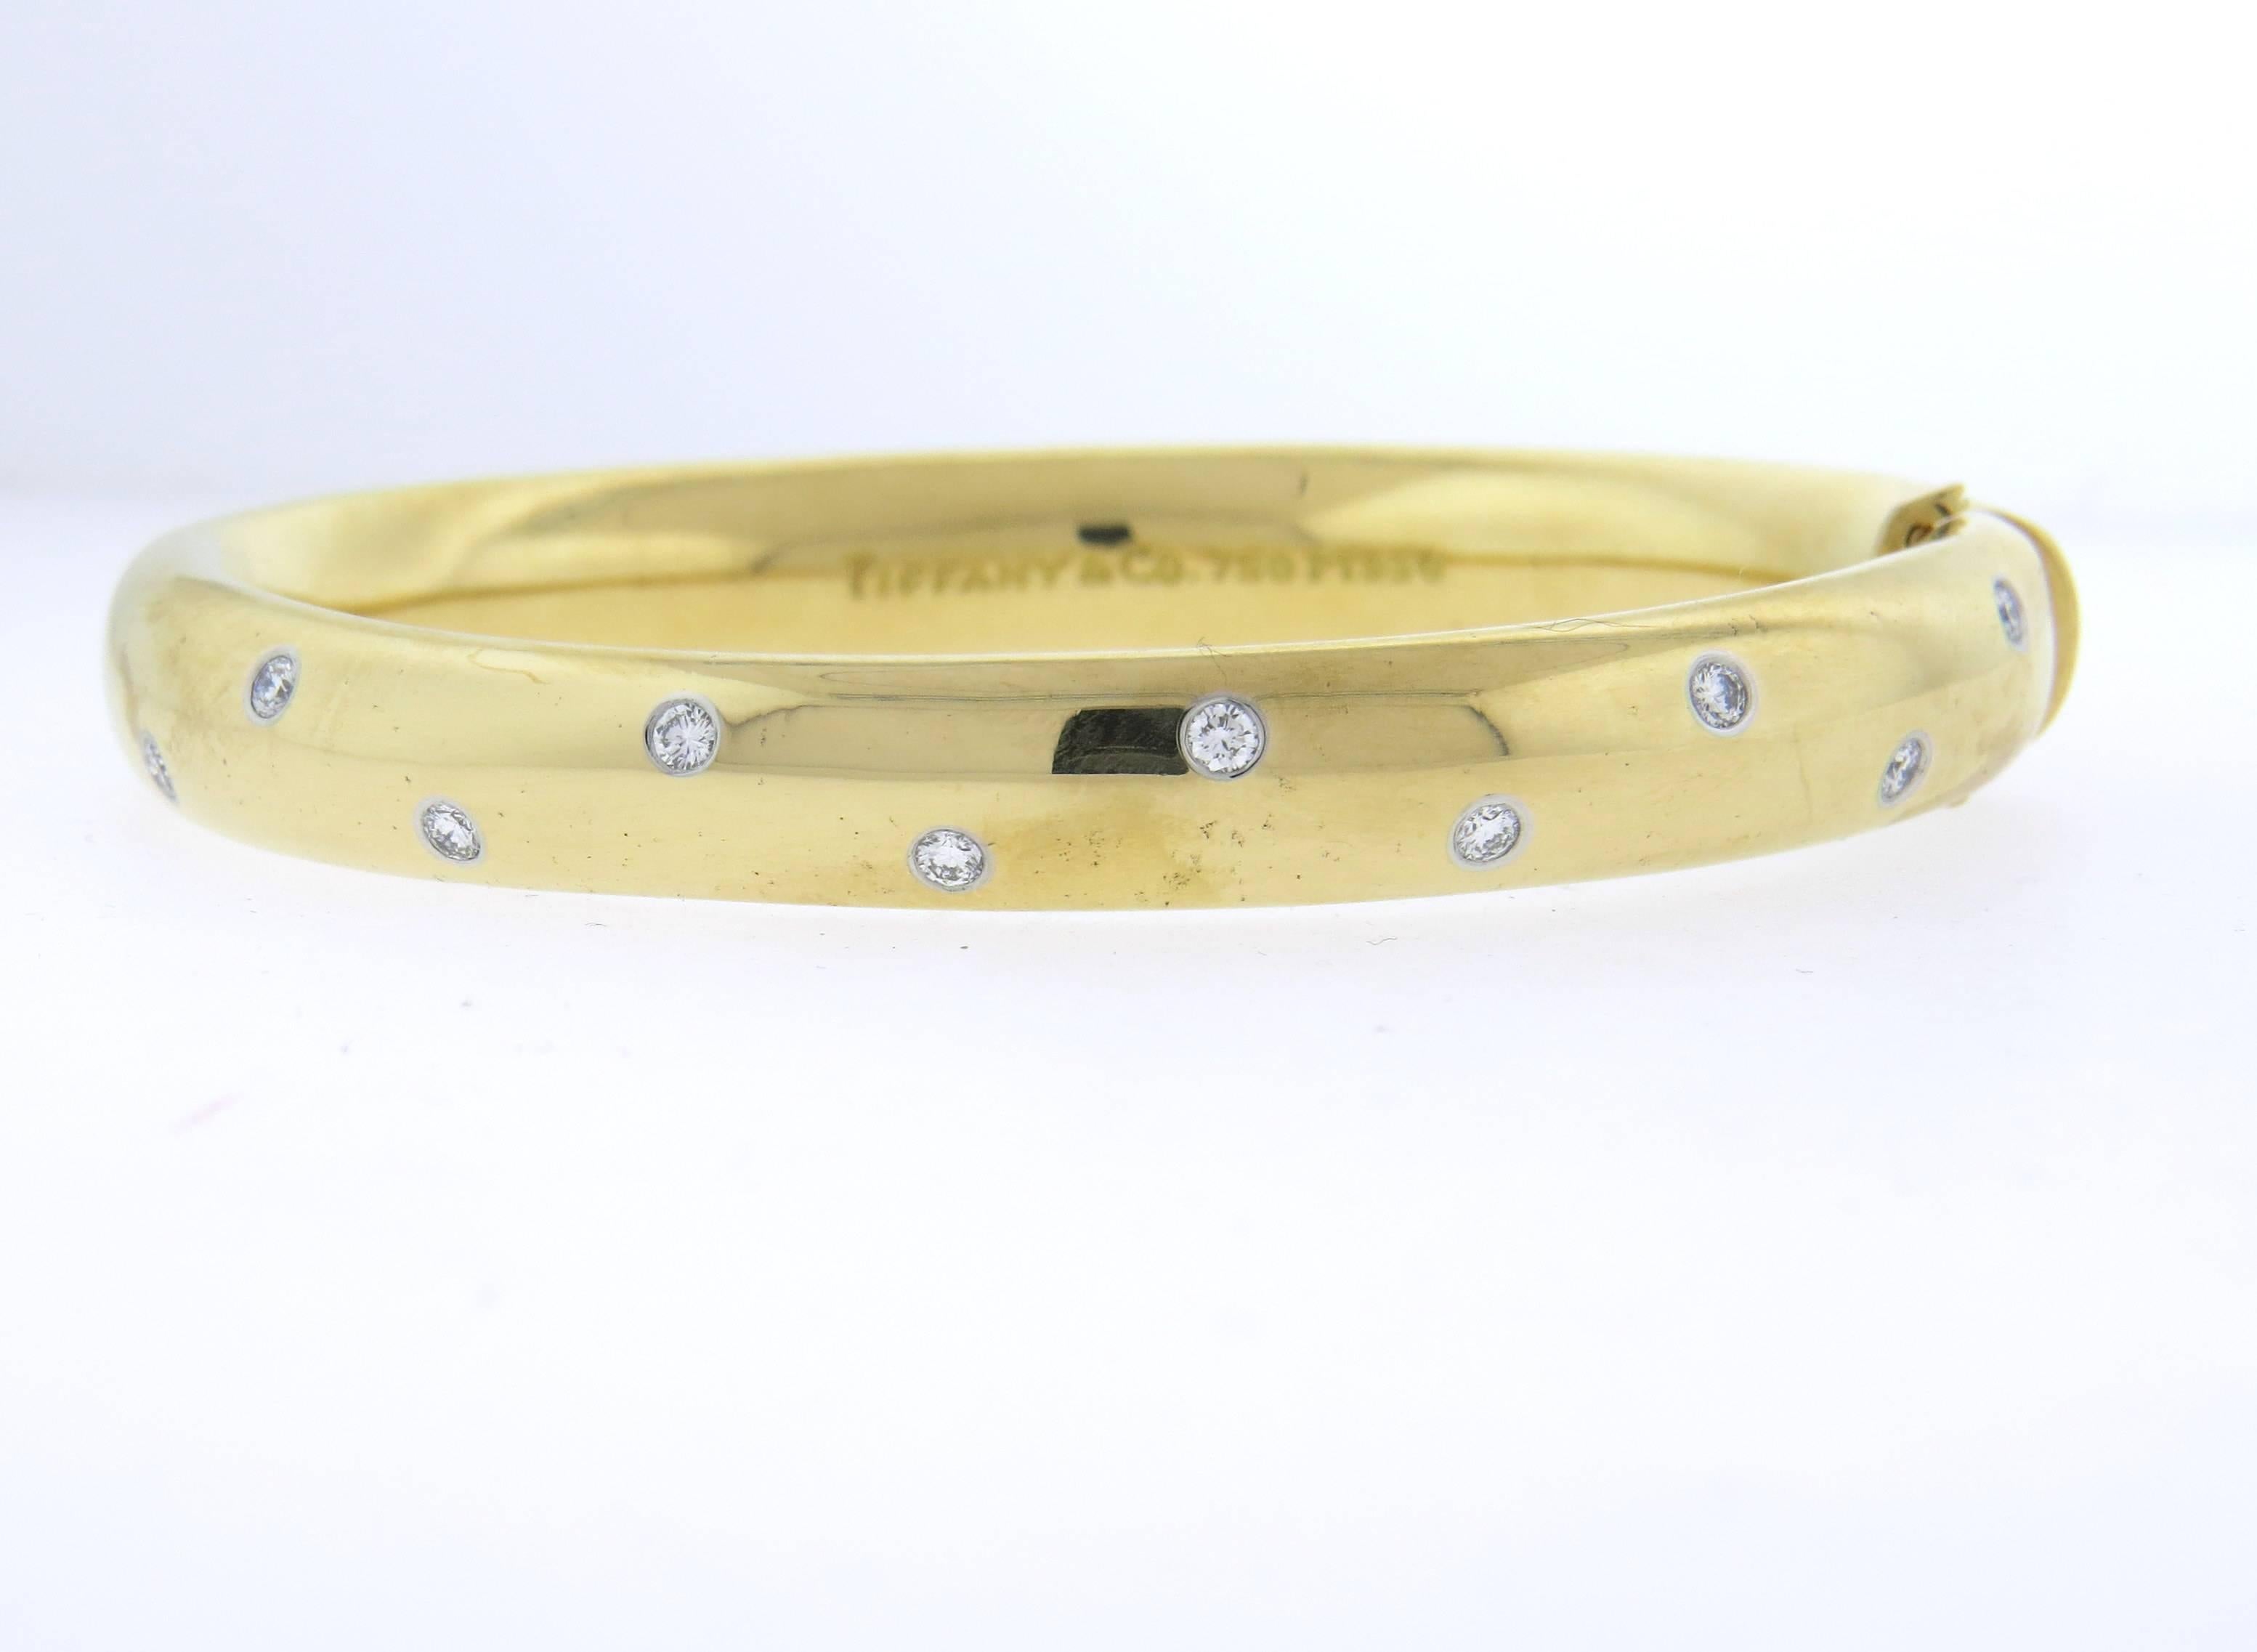 18k yellow gold and platinum bangle, crafted by Tiffany & Co for Etoile collection, decorated with approximately 0.50ctw in G/VS diamonds. Bracelet will comfortably fit up to 7